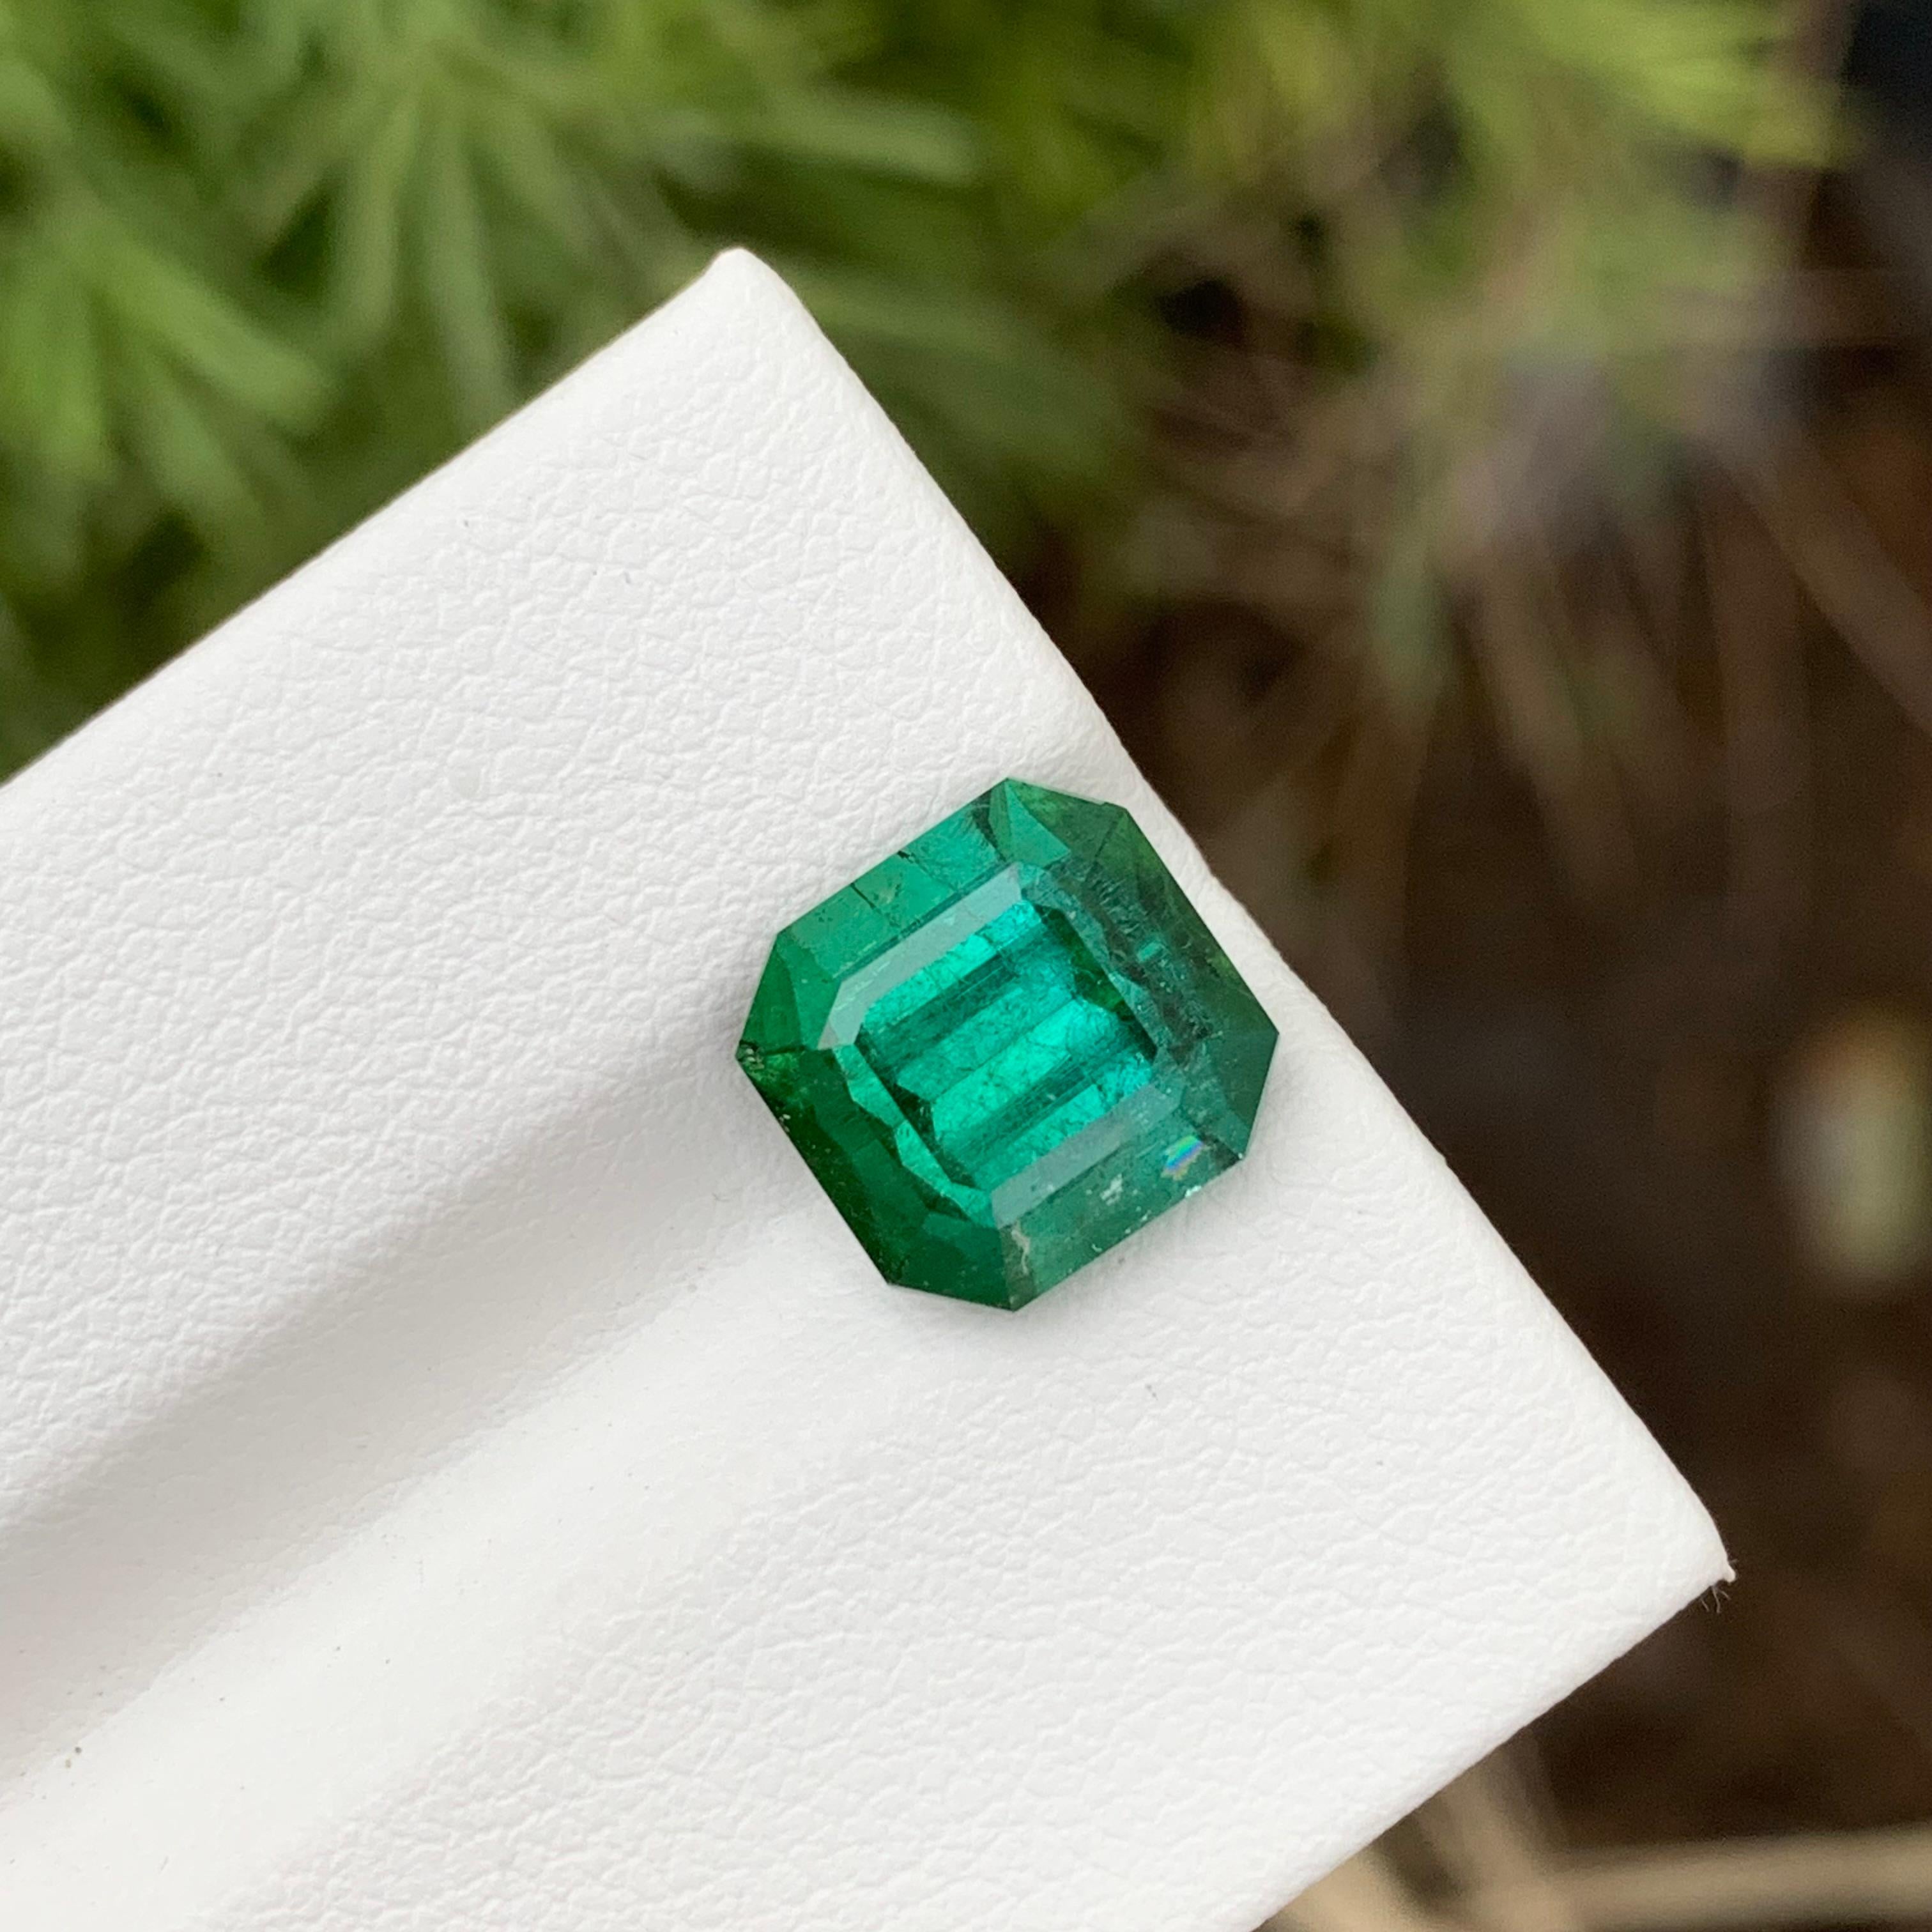 Loose  Green Tourmaline
Weight: 4.60 Carats
Dimension: 9.4 x 9.1 x 7.2 Mm
Origin: Afghanistan
Treatment: Non
Certificate: On Demand
Shape: Octagon 

Green tourmaline, also known as verdelite, is a mesmerizing gemstone celebrated for its stunning